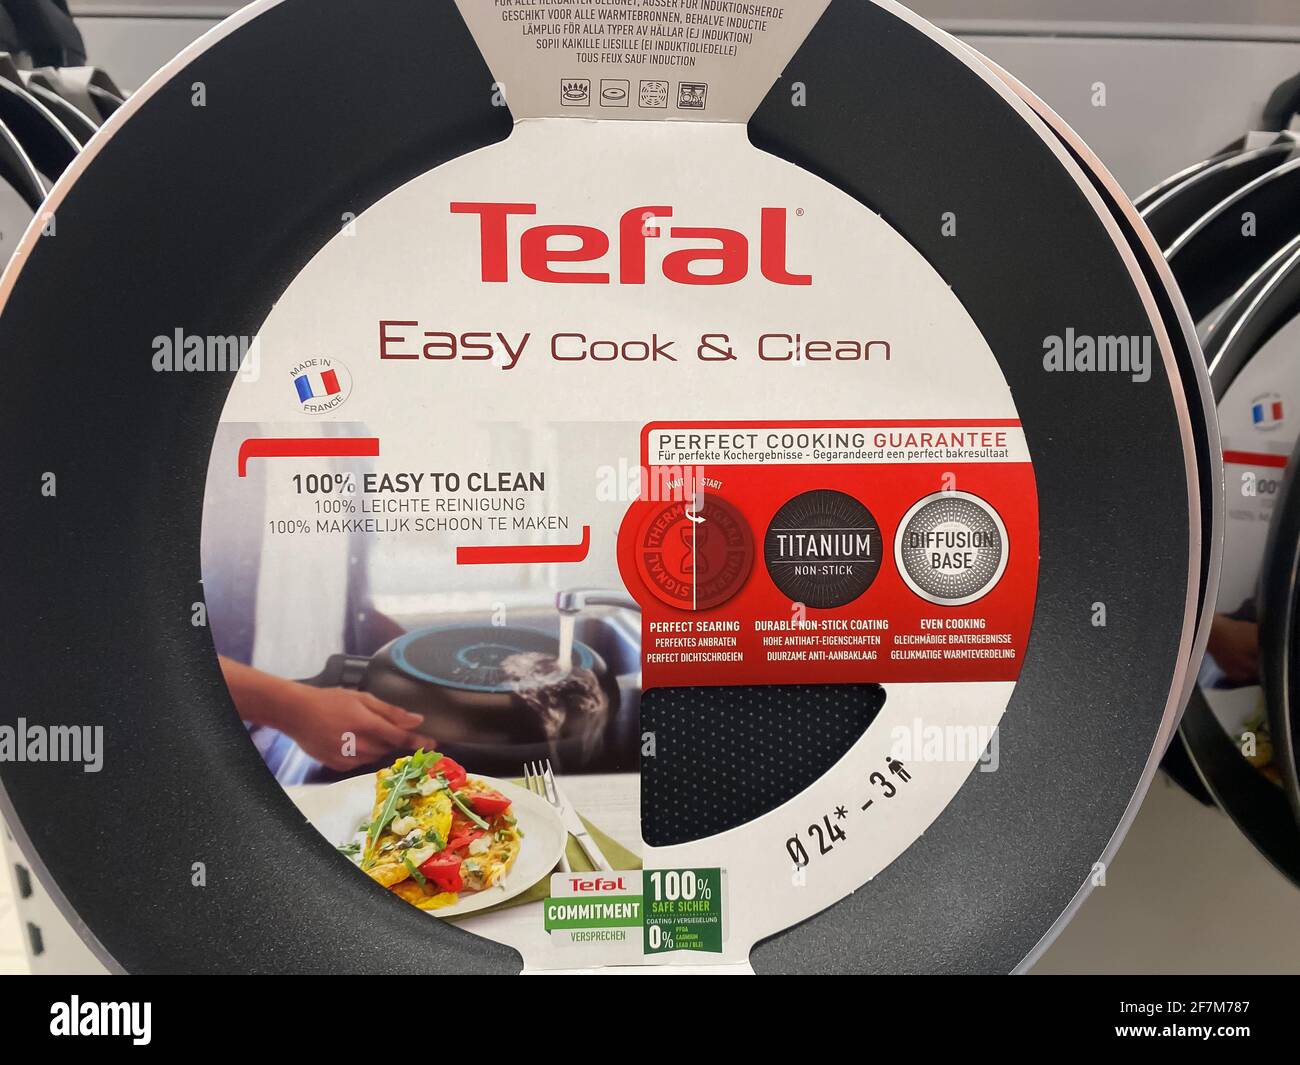 https://c8.alamy.com/comp/2F7M787/viersen-germany-march-1-2021-closeup-of-frying-pan-with-tefal-logo-lettering-in-shelf-of-german-supermarket-2F7M787.jpg